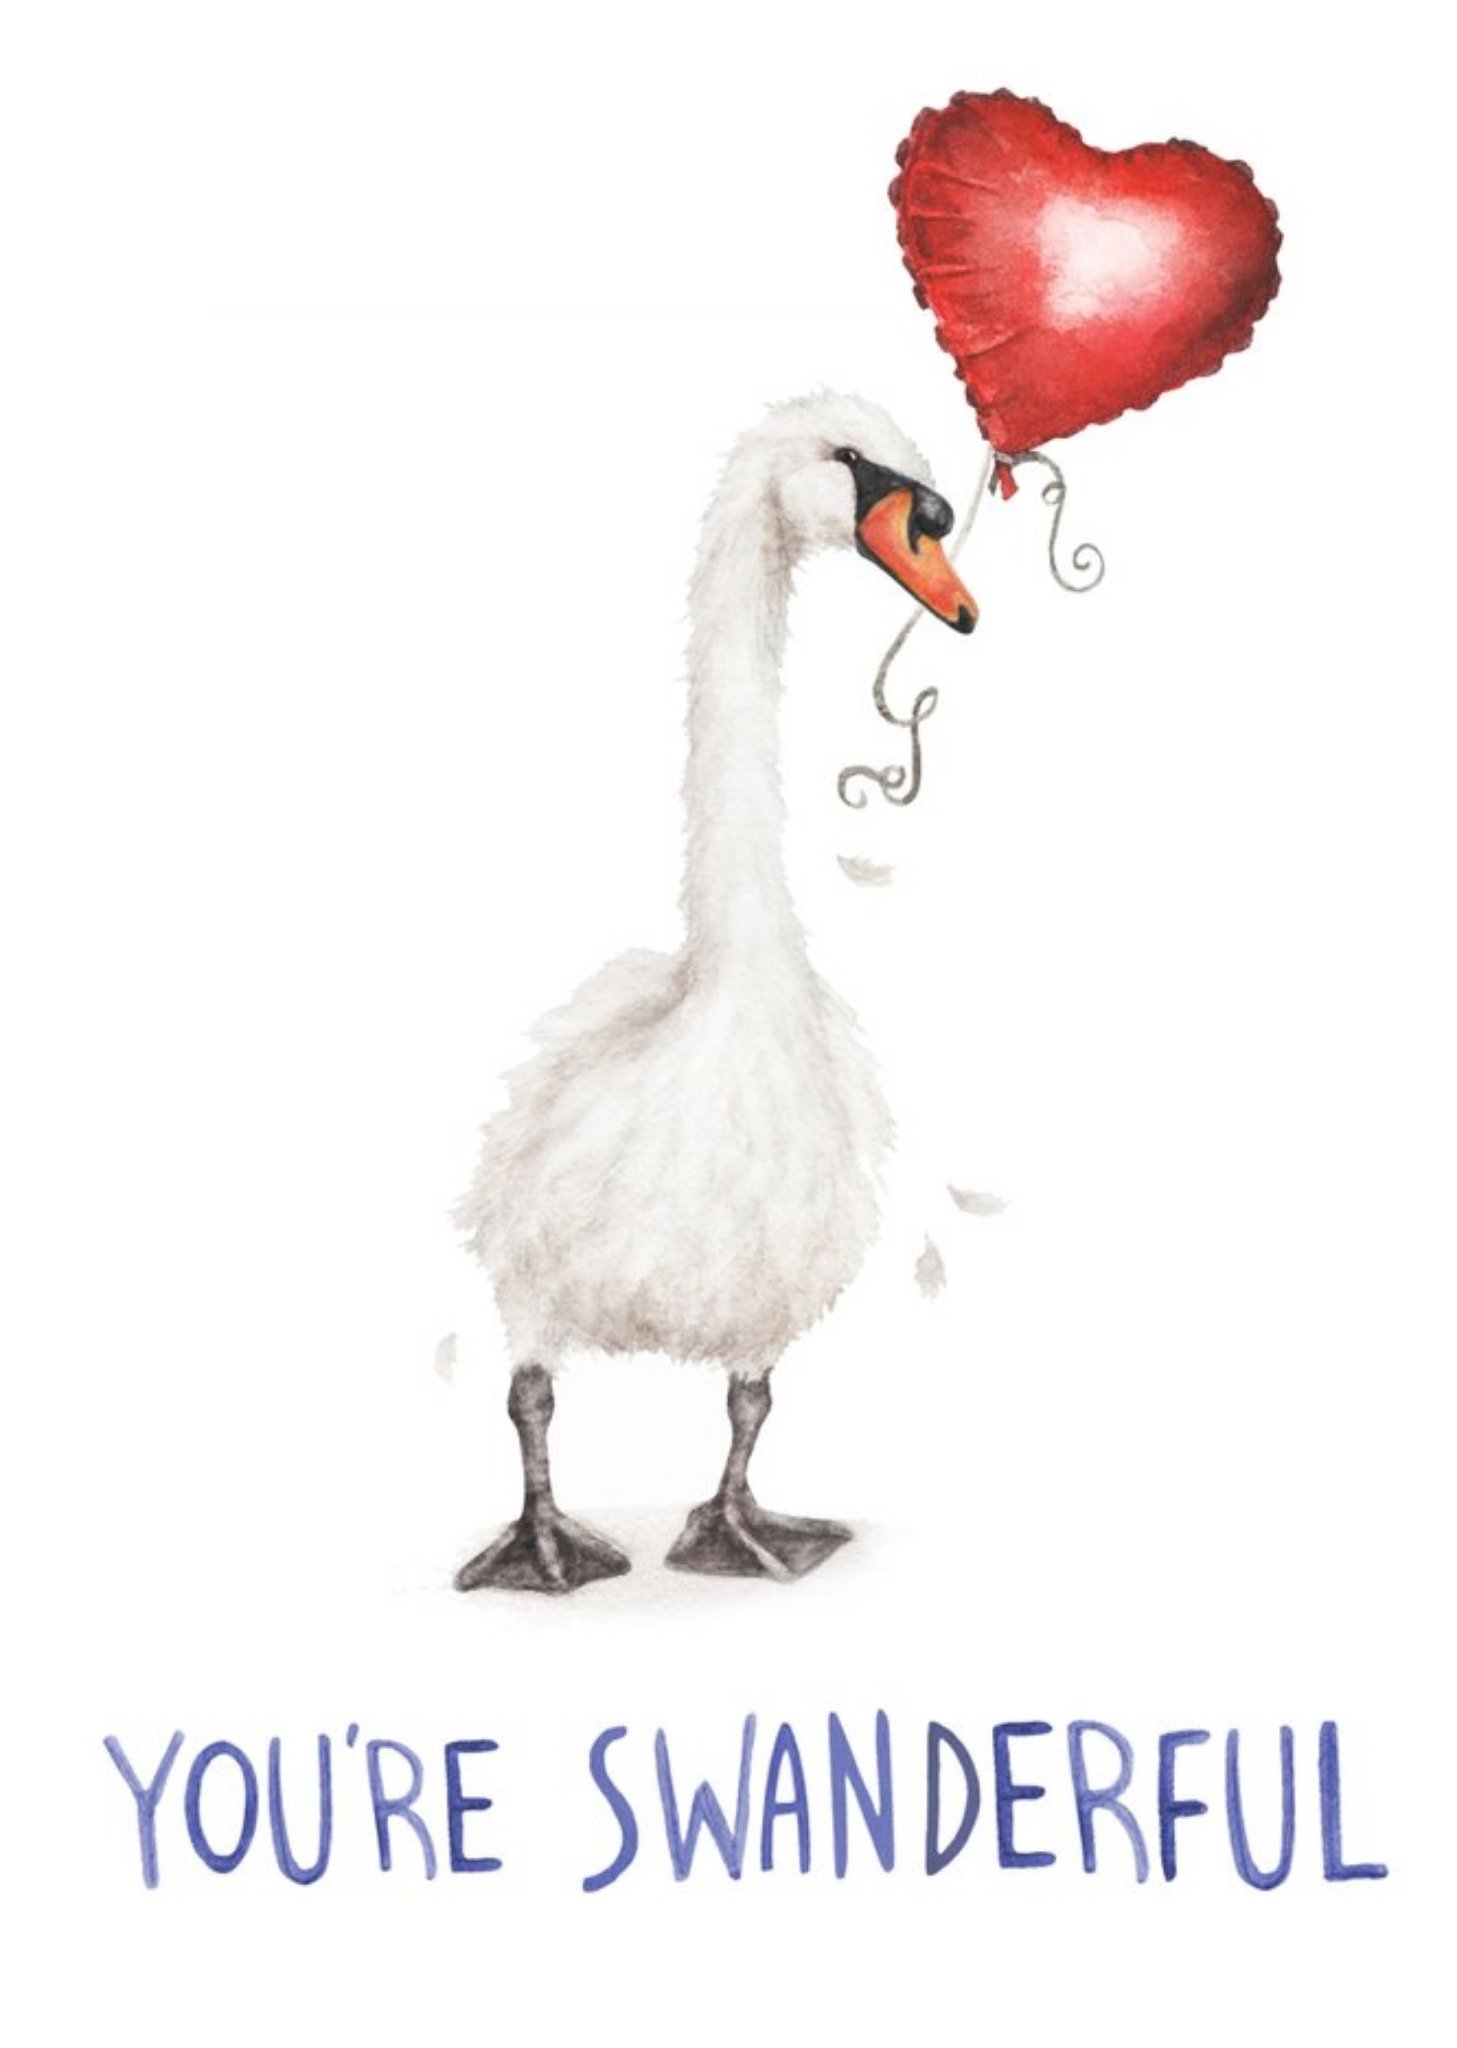 Moonpig Sweet Swan With A Heart Shaped Balloon Illustration Pun Card, Large